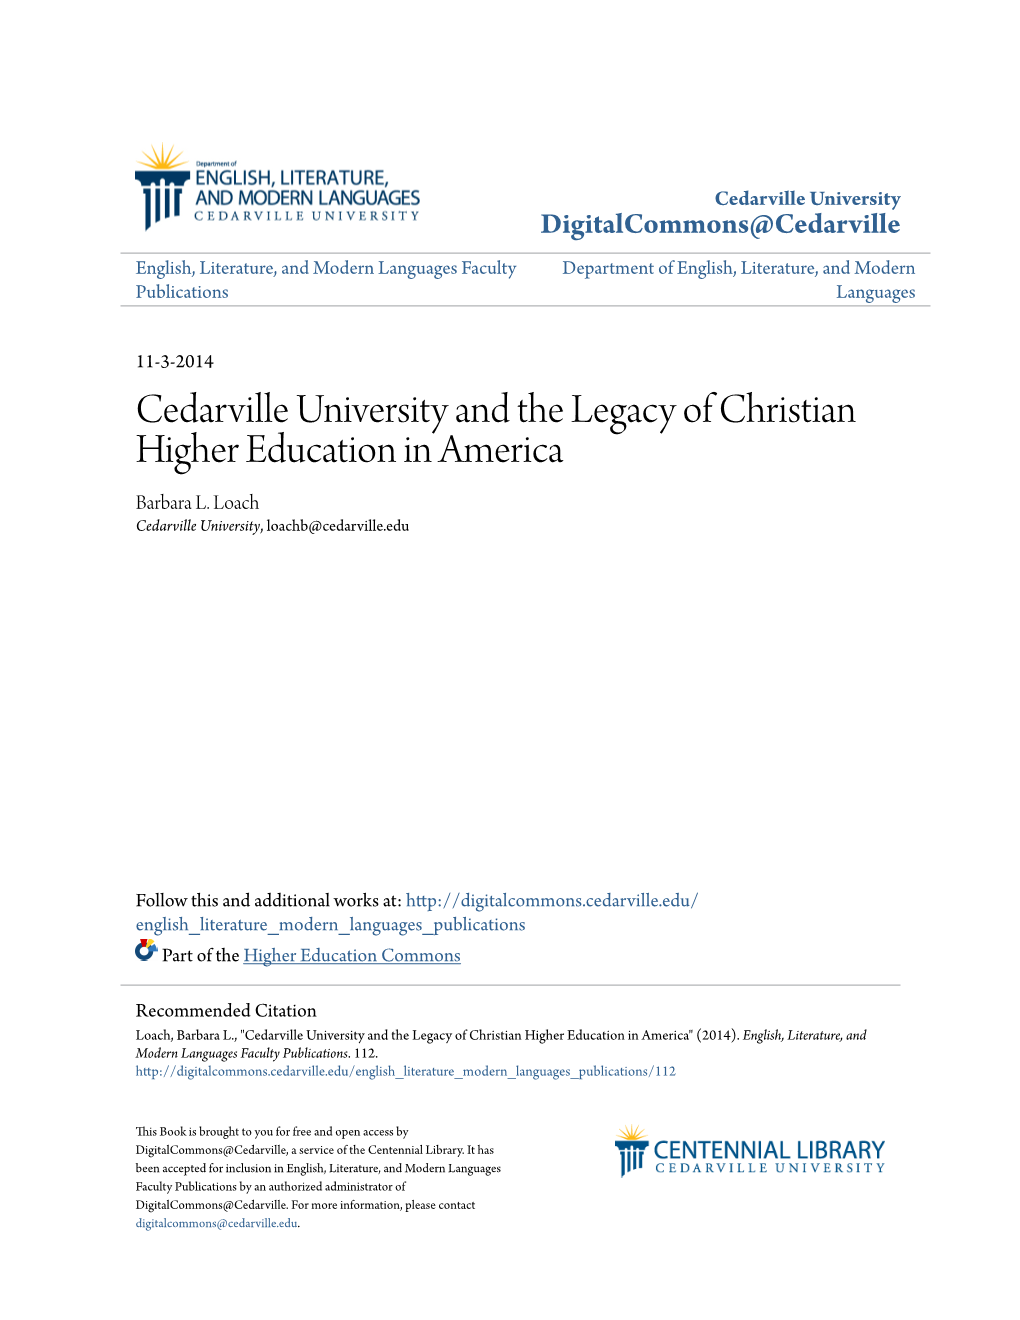 Cedarville University and the Legacy of Christian Higher Education in America Barbara L